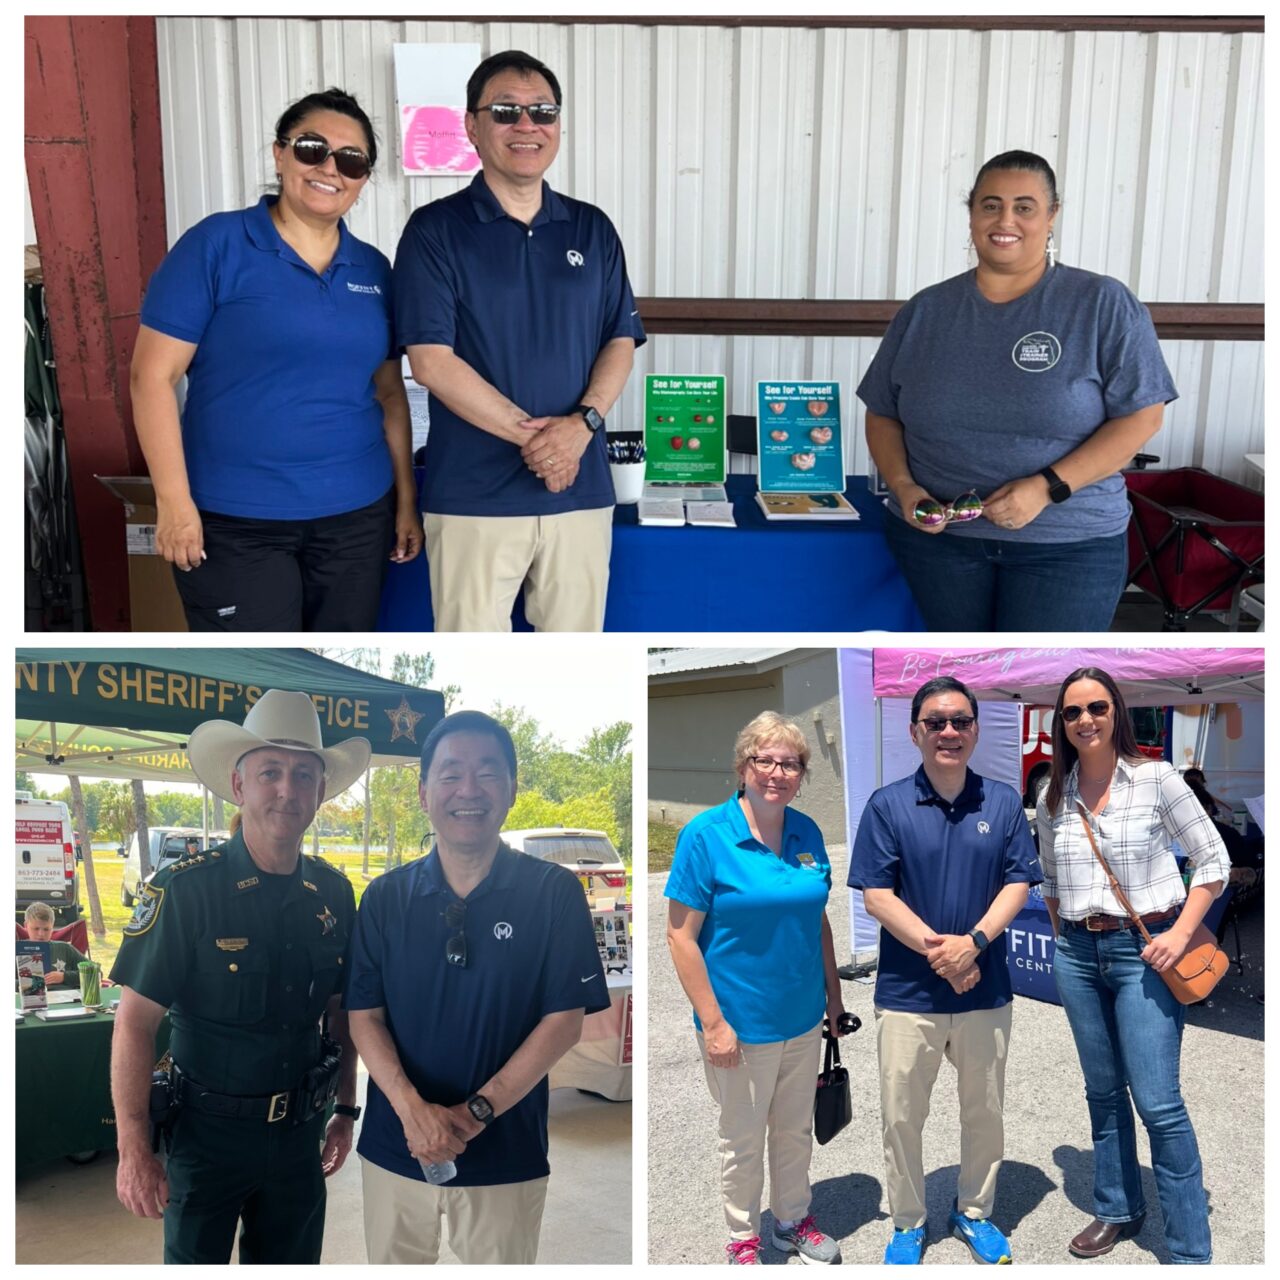 Patrick Hwu: Our Moffitt Cancer Centre team was honoured to be a part of the Hardee County Multi-cultural Day at Pioneer Park today